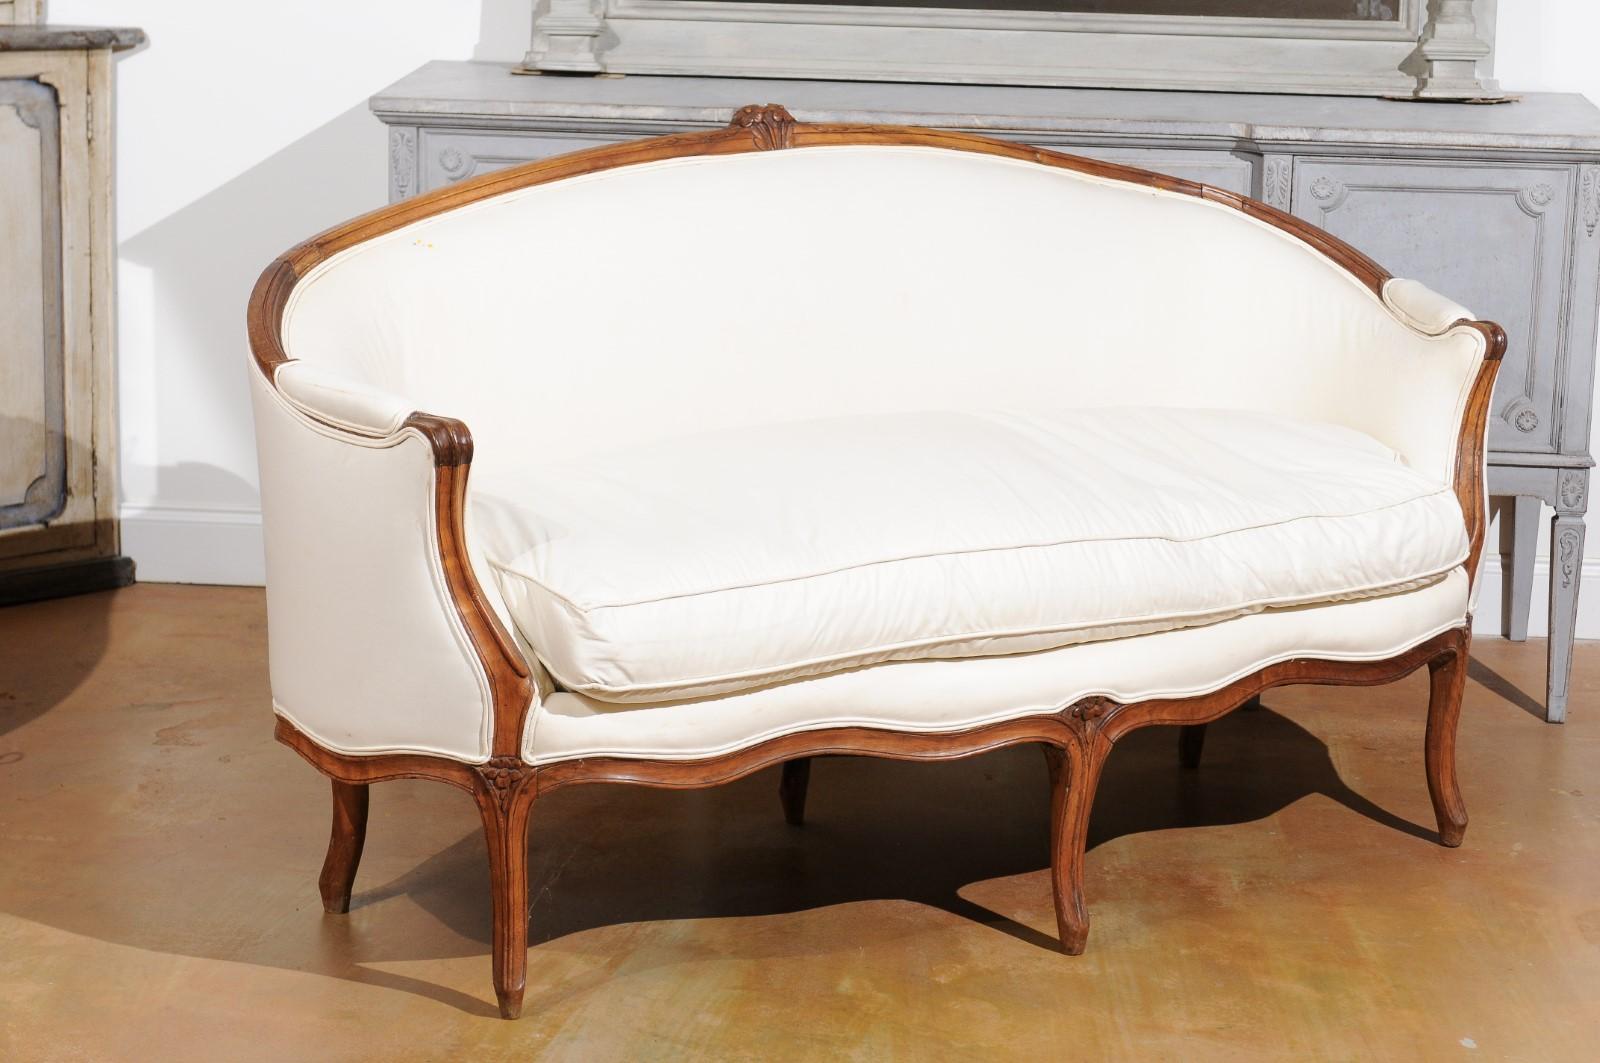 18th Century French 1740s Louis XV Period Walnut Settee with Cabriole Legs and New Upholstery